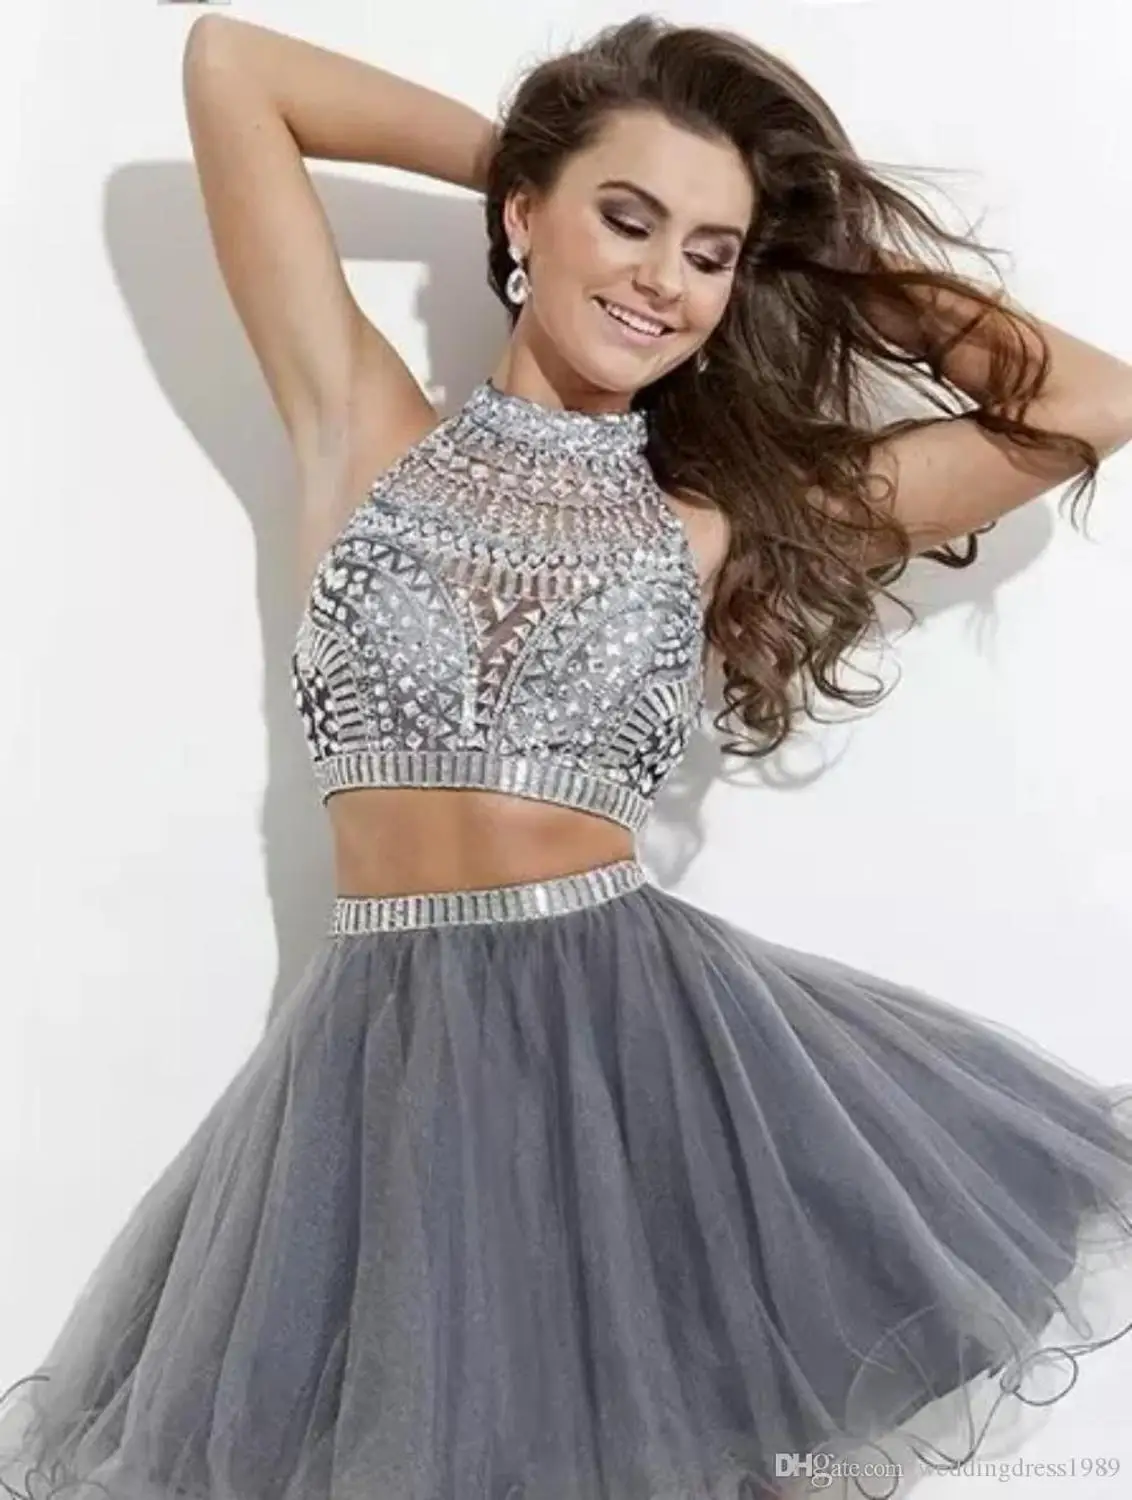 

Sexy Homecoming Dresses A-line High Neck Tulle Embellished Two-piece Beaded Graduation Dress Cocktail Party Dresses Mini Skirt